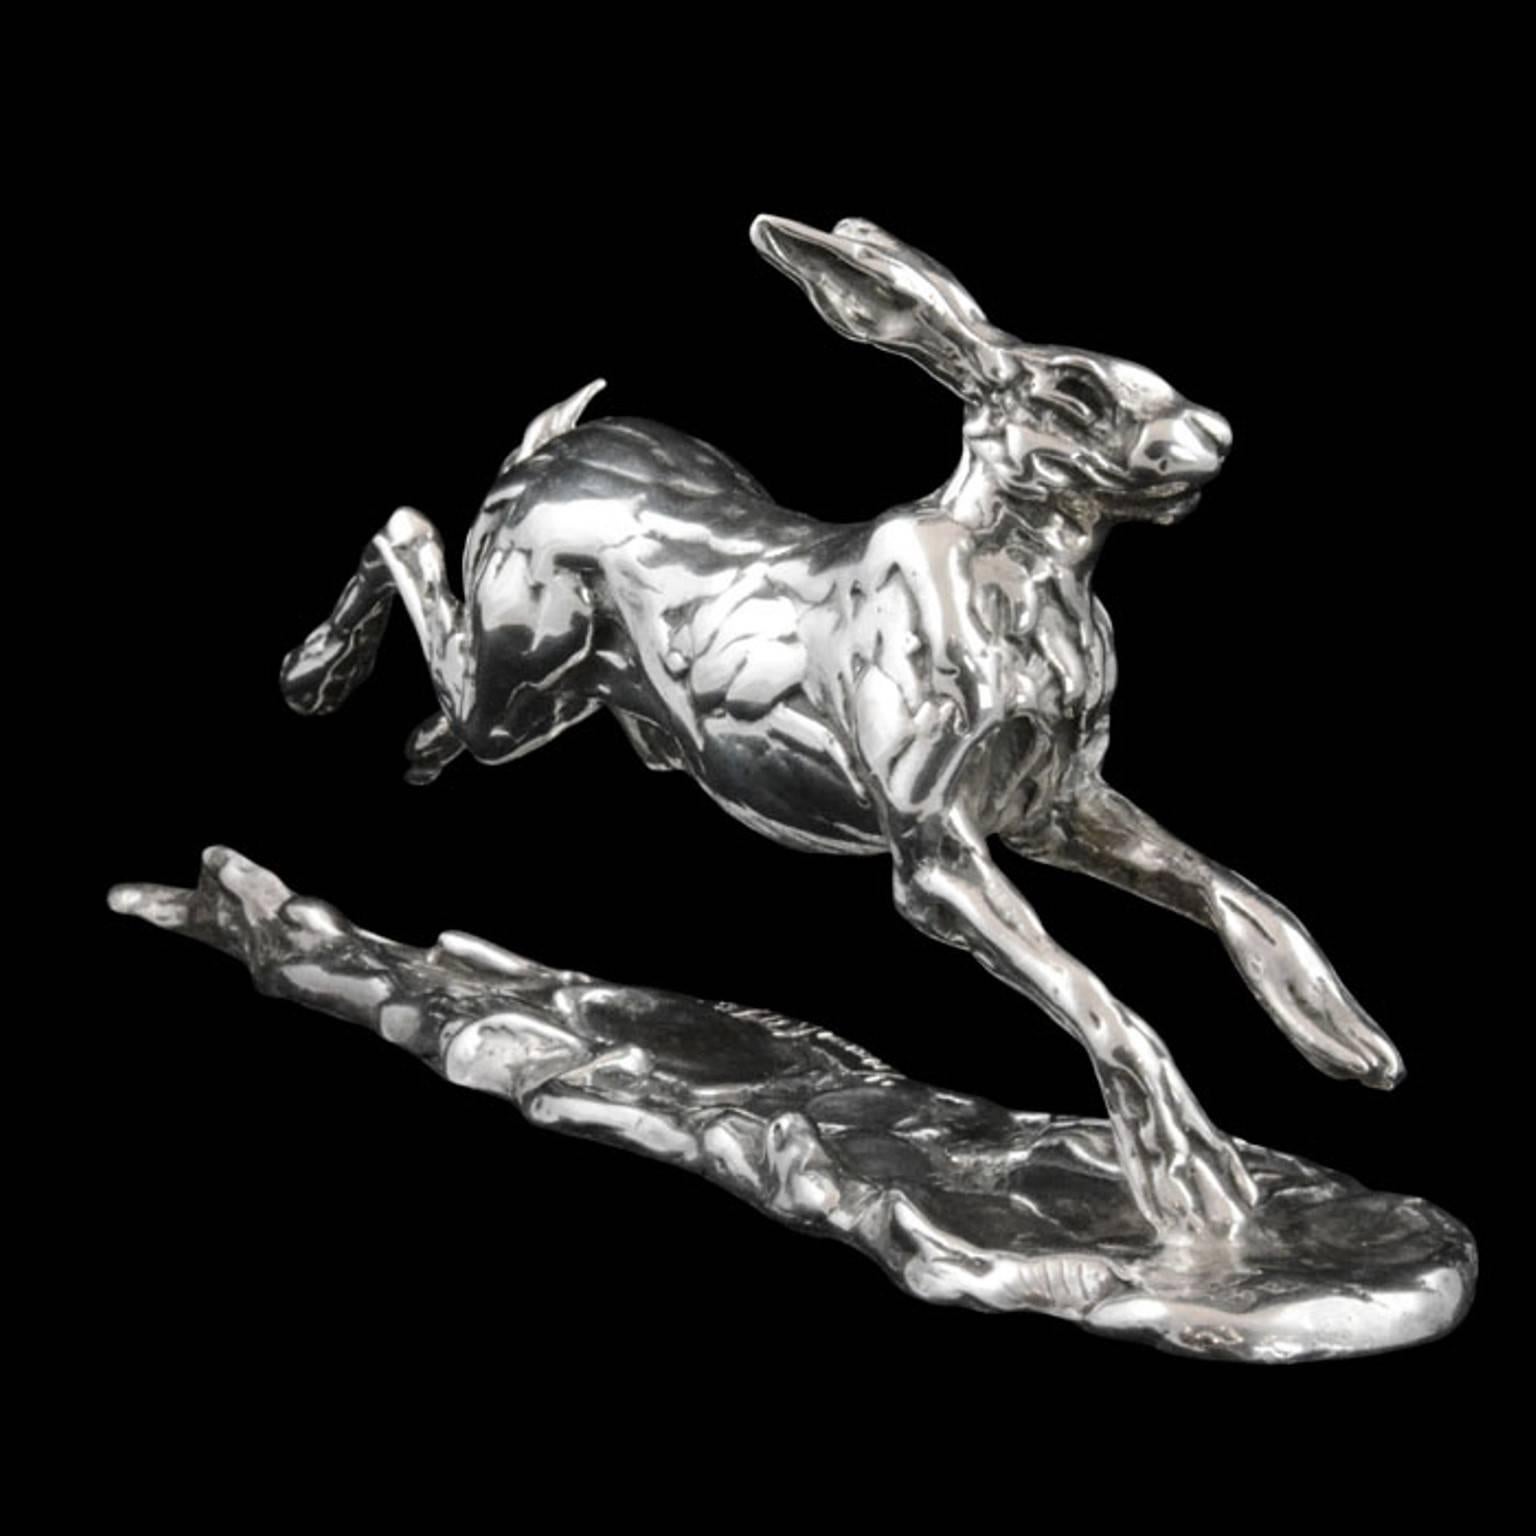 Lucy Kinsella 'Running Hare' sterling silver sculpture 1